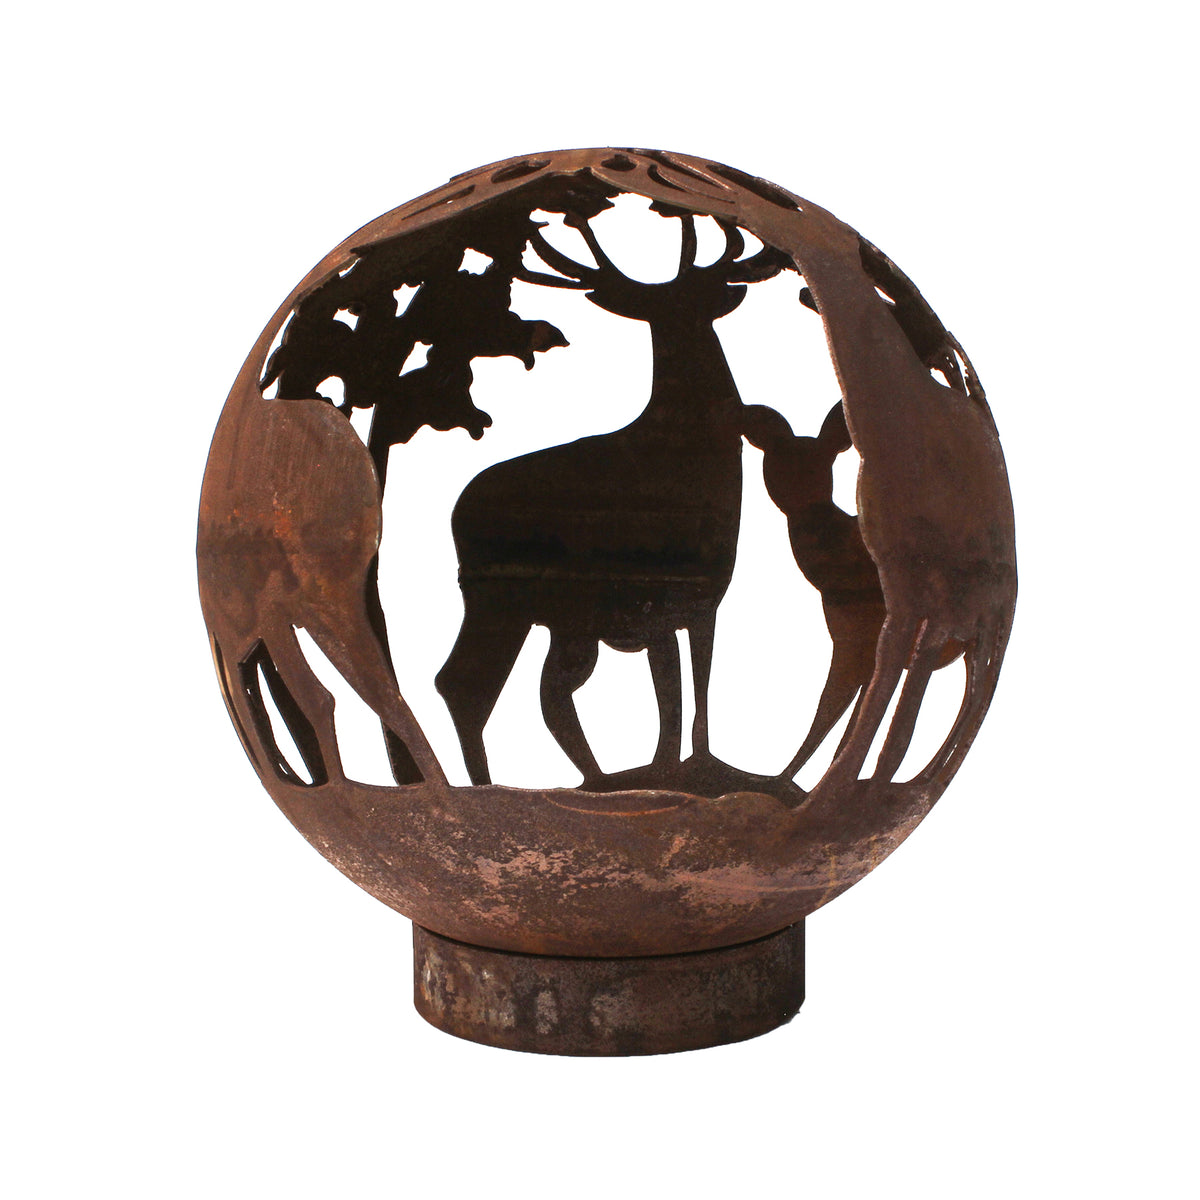 Garden Fire Ball 50cm Stag Design with Rust Finish